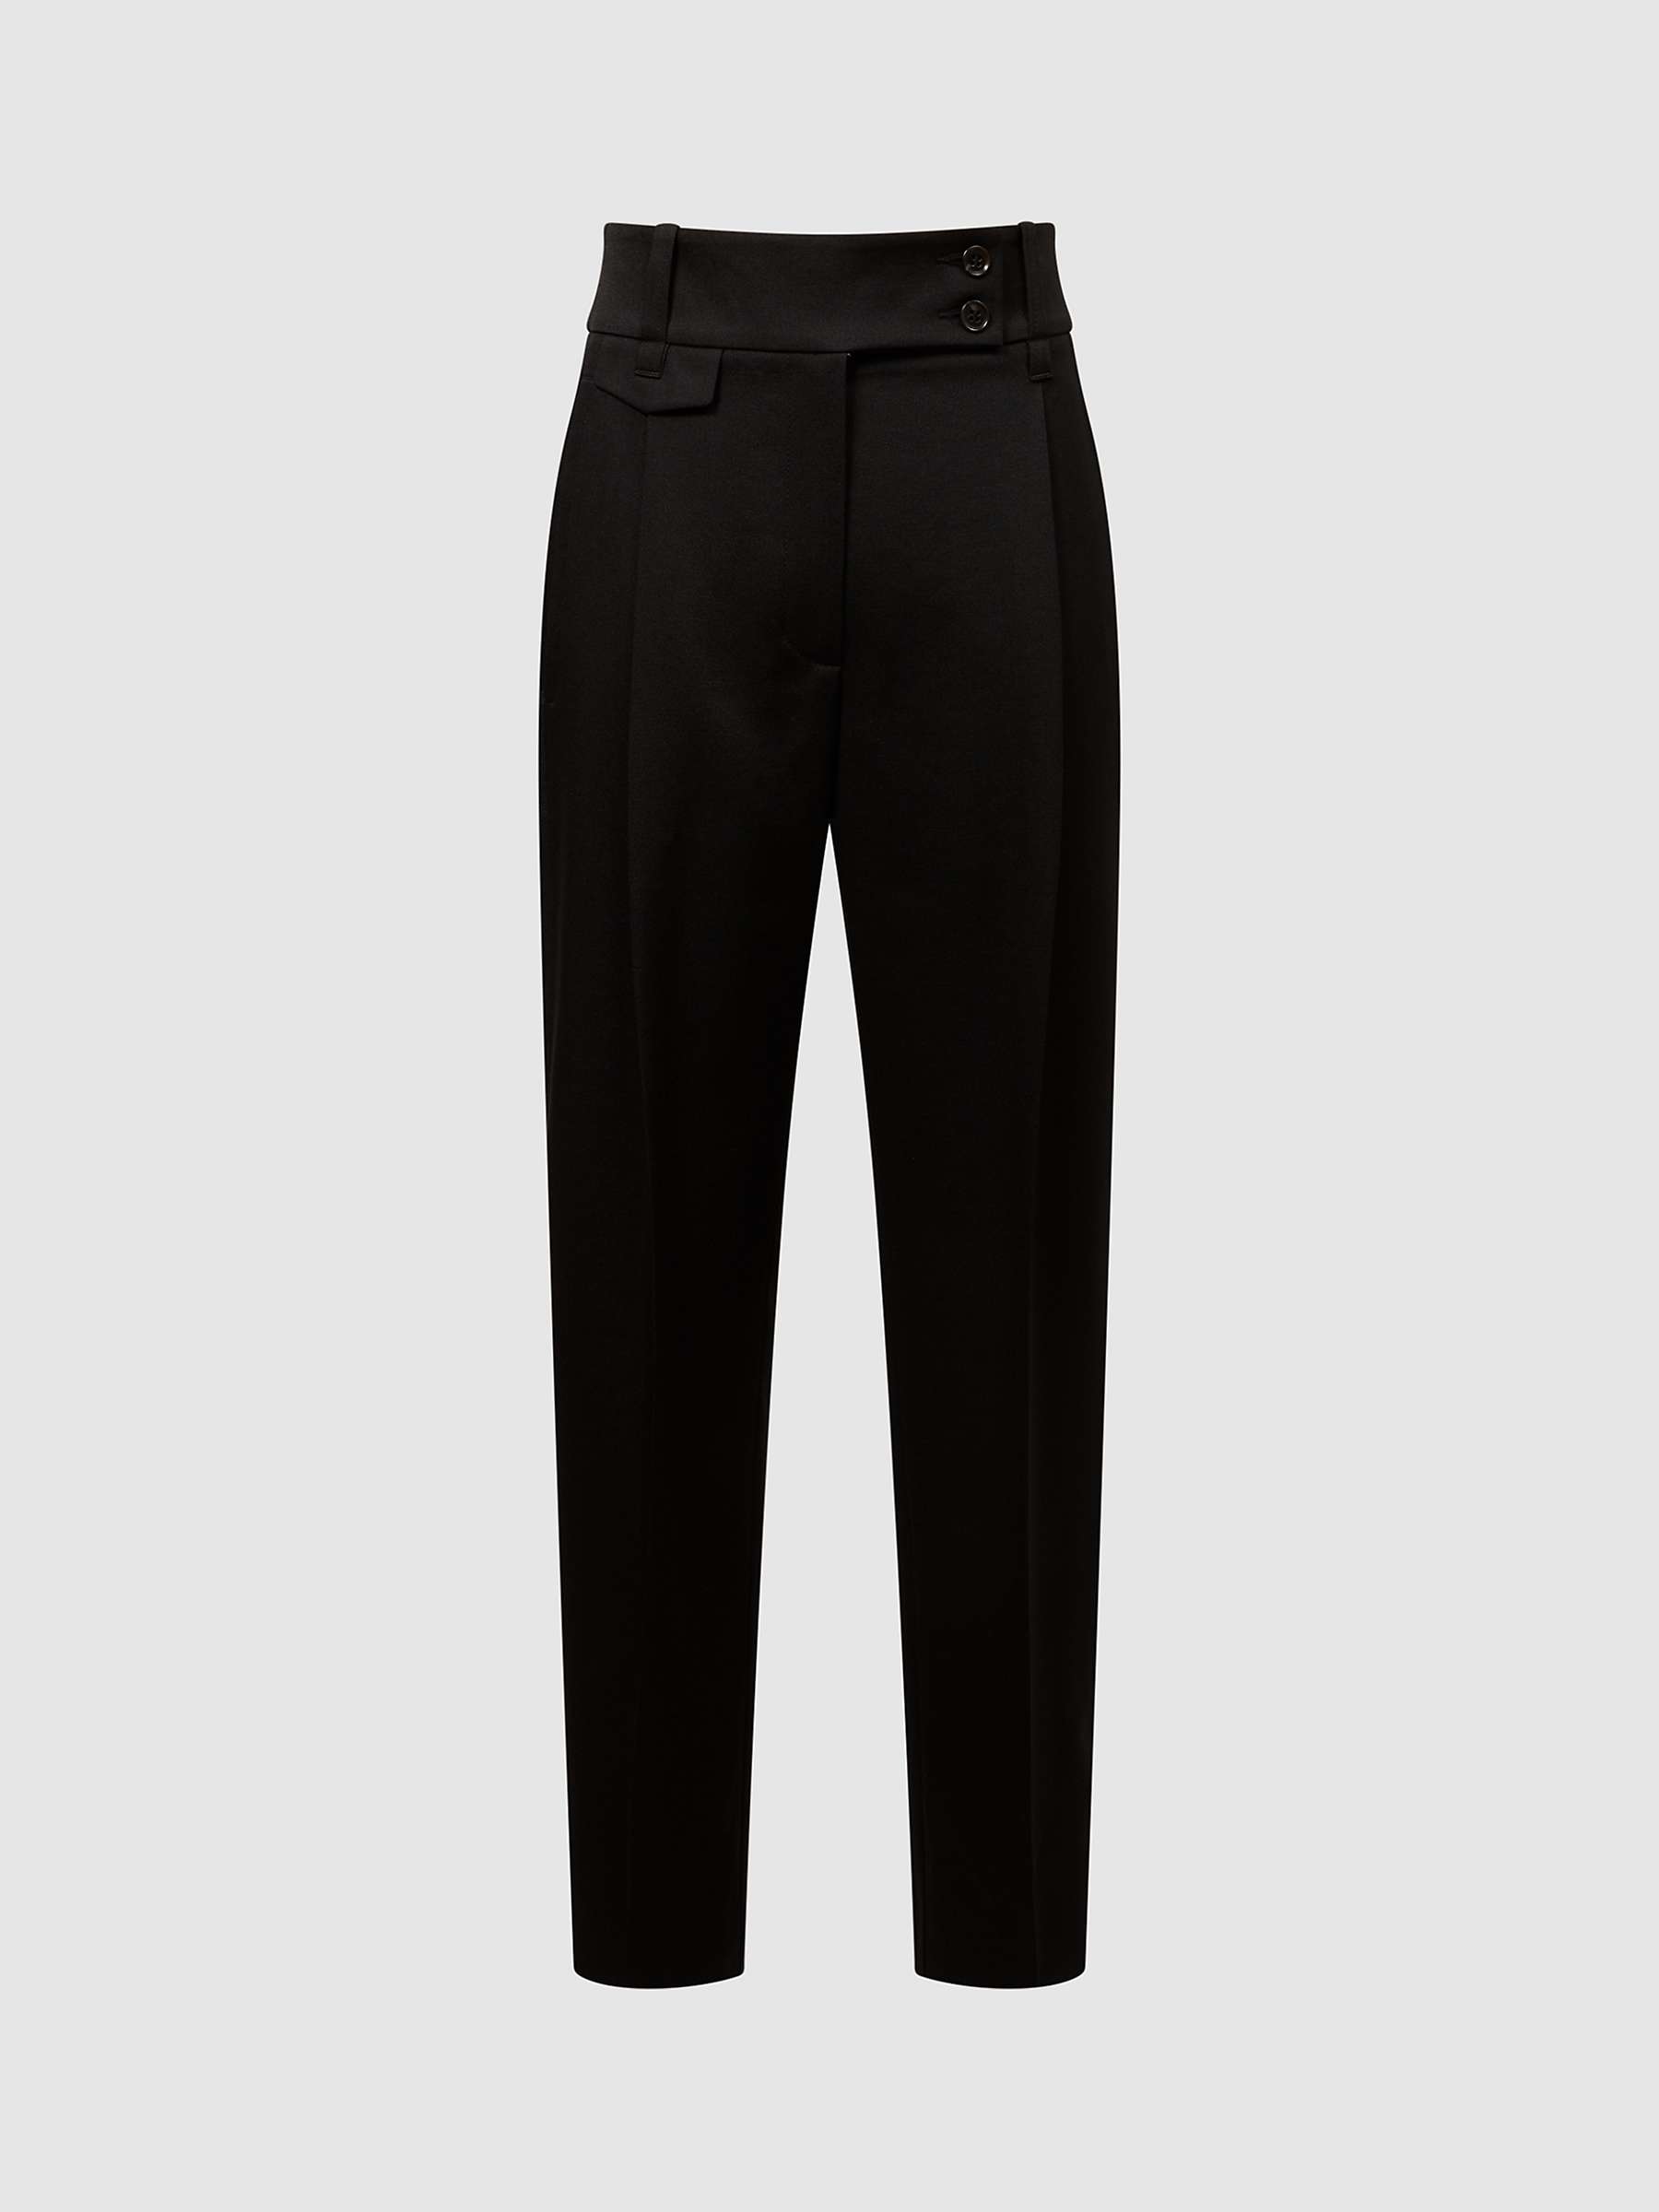 Reiss River High Waist Tailored Trousers, Black at John Lewis & Partners